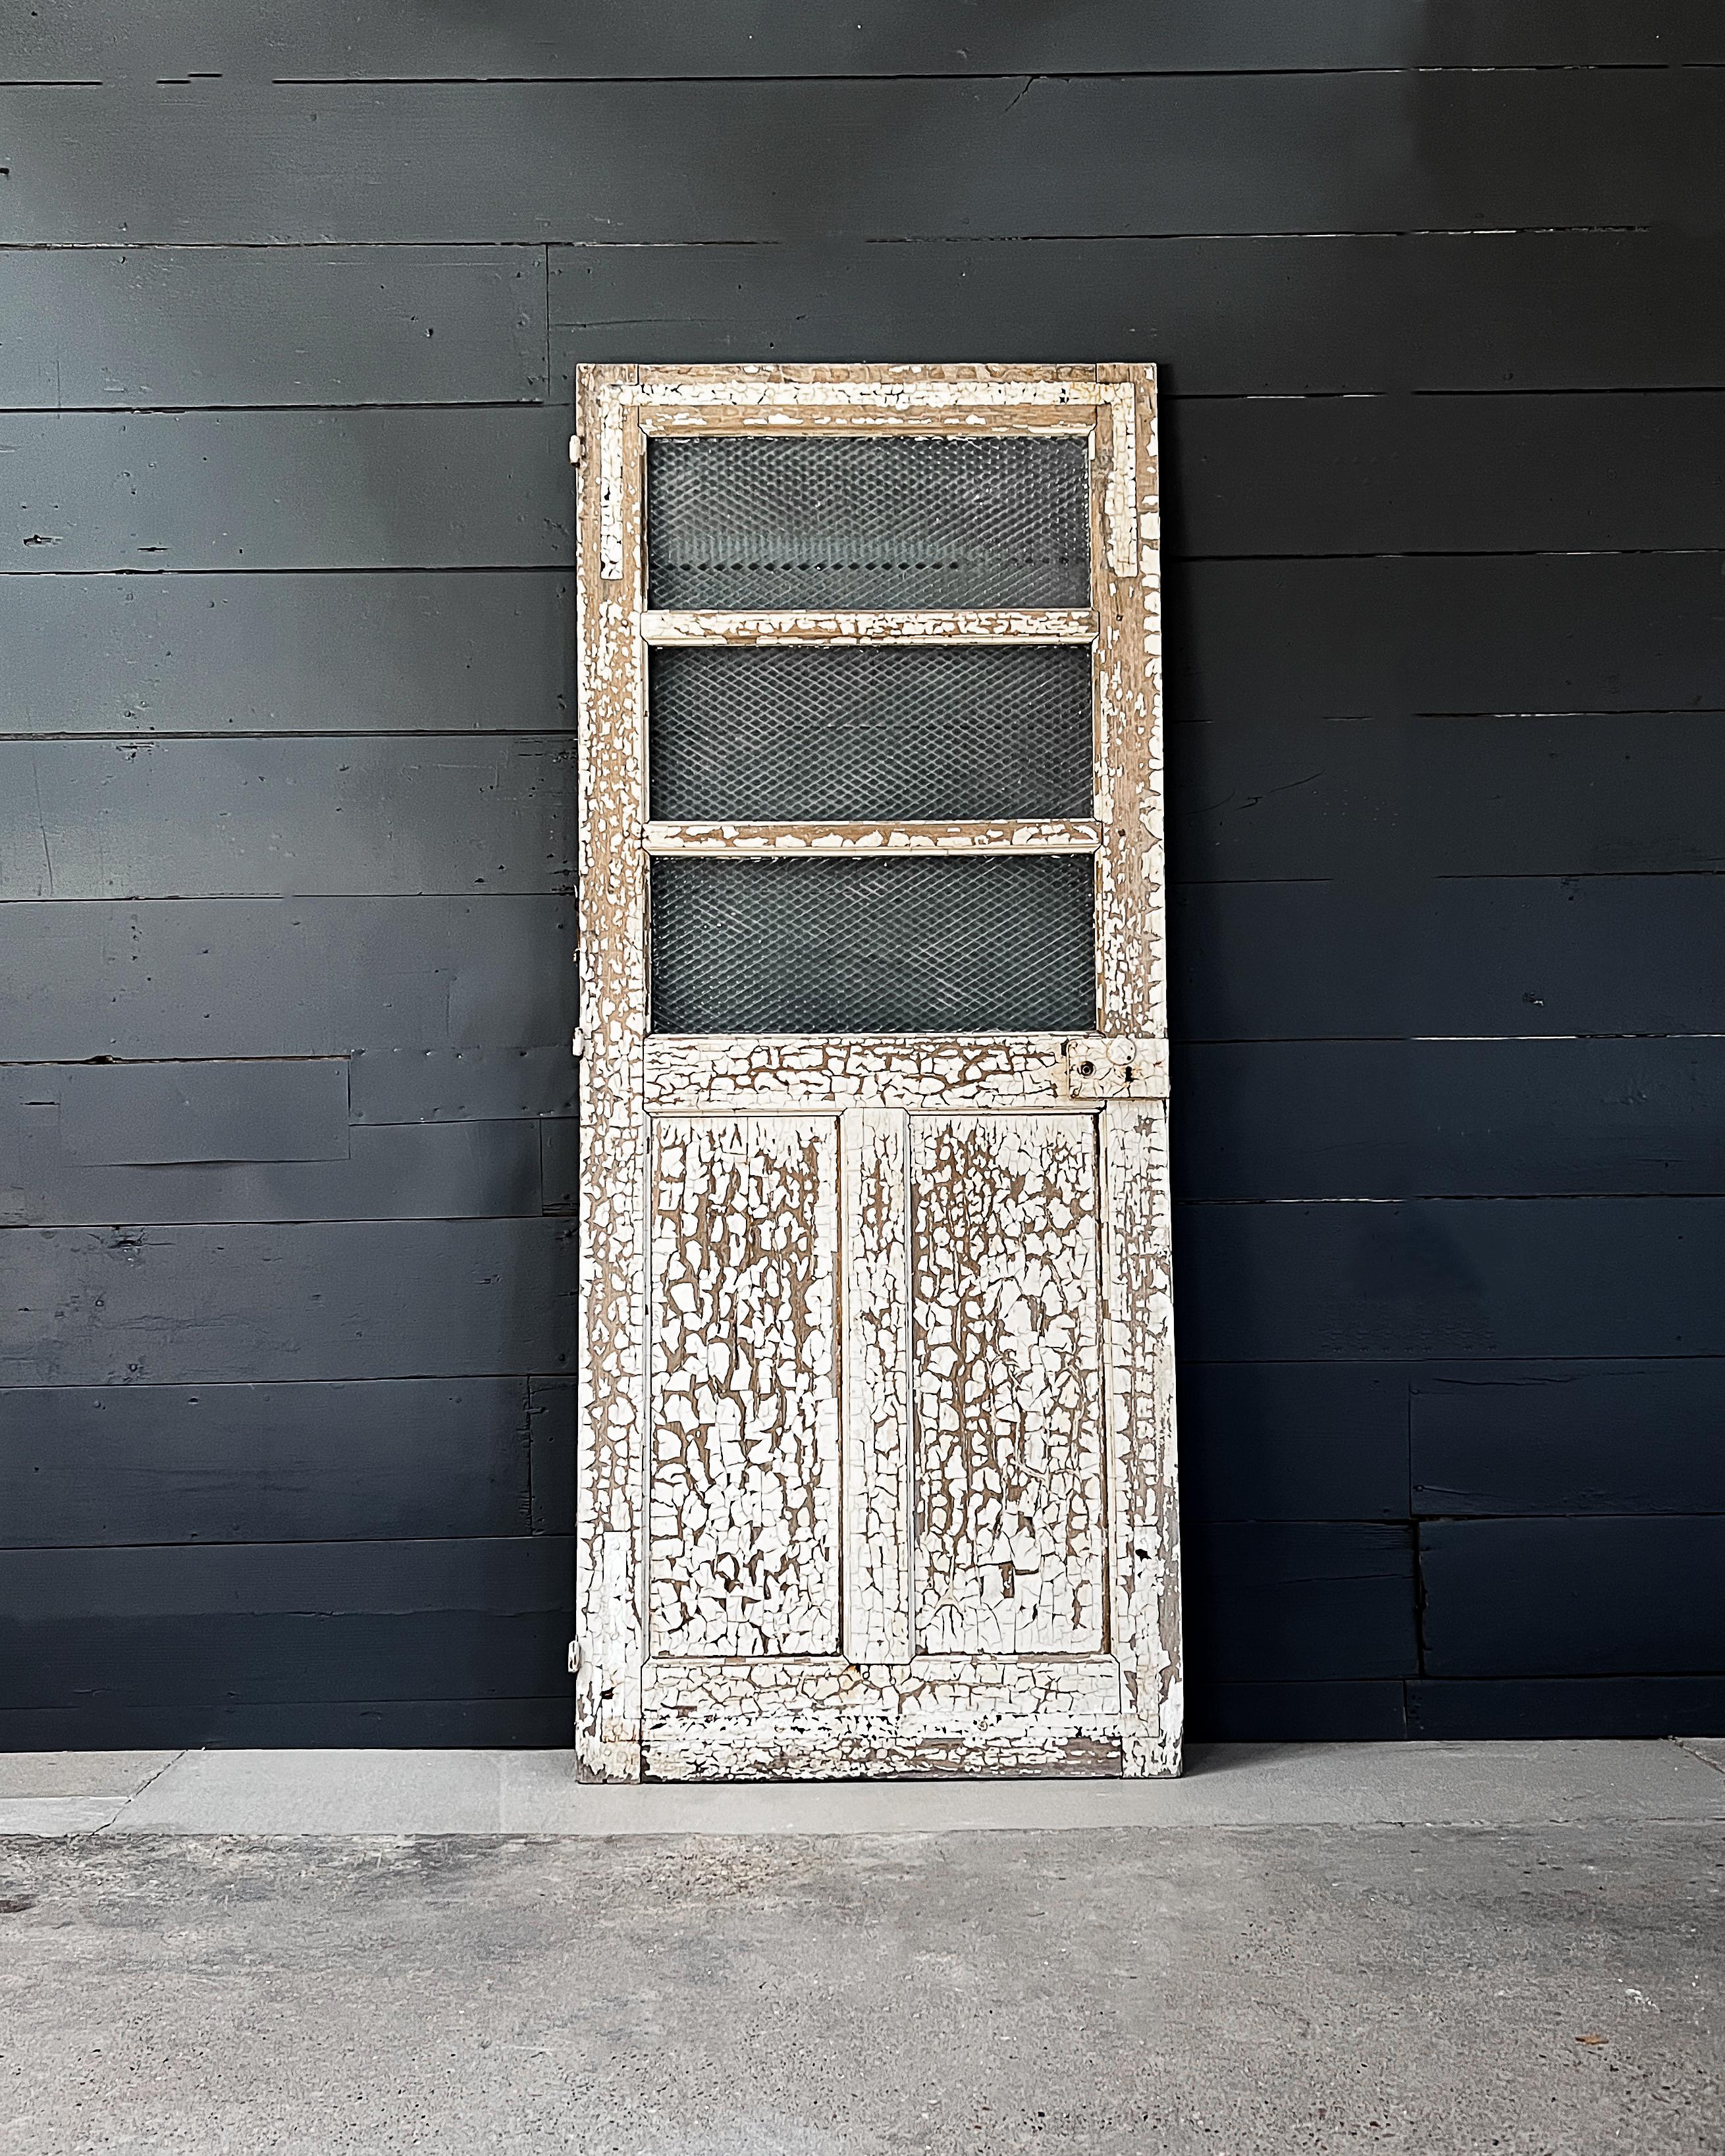 Turn of the century reclaimed French 3 lite over 2-panel configuration diamond glass exterior door. Install in your modern home to add old-world charm and character.

Salvaged in France.

Original white paint having a crackled texture covers one